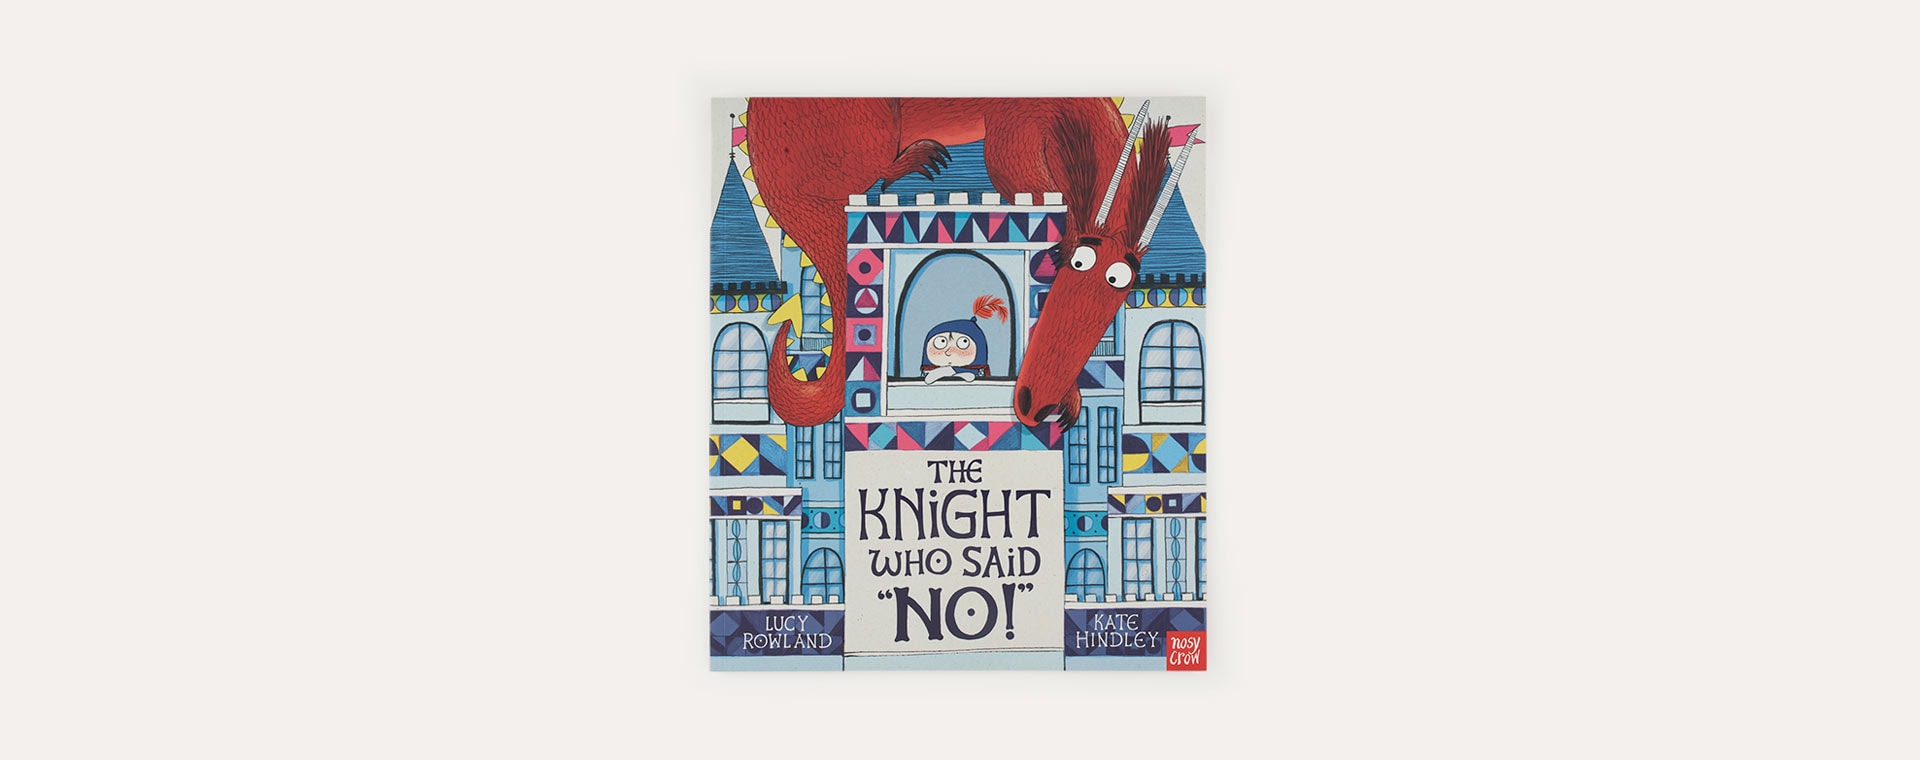 The Knight who said stop bookspeed The Knight Who Said 'No!'